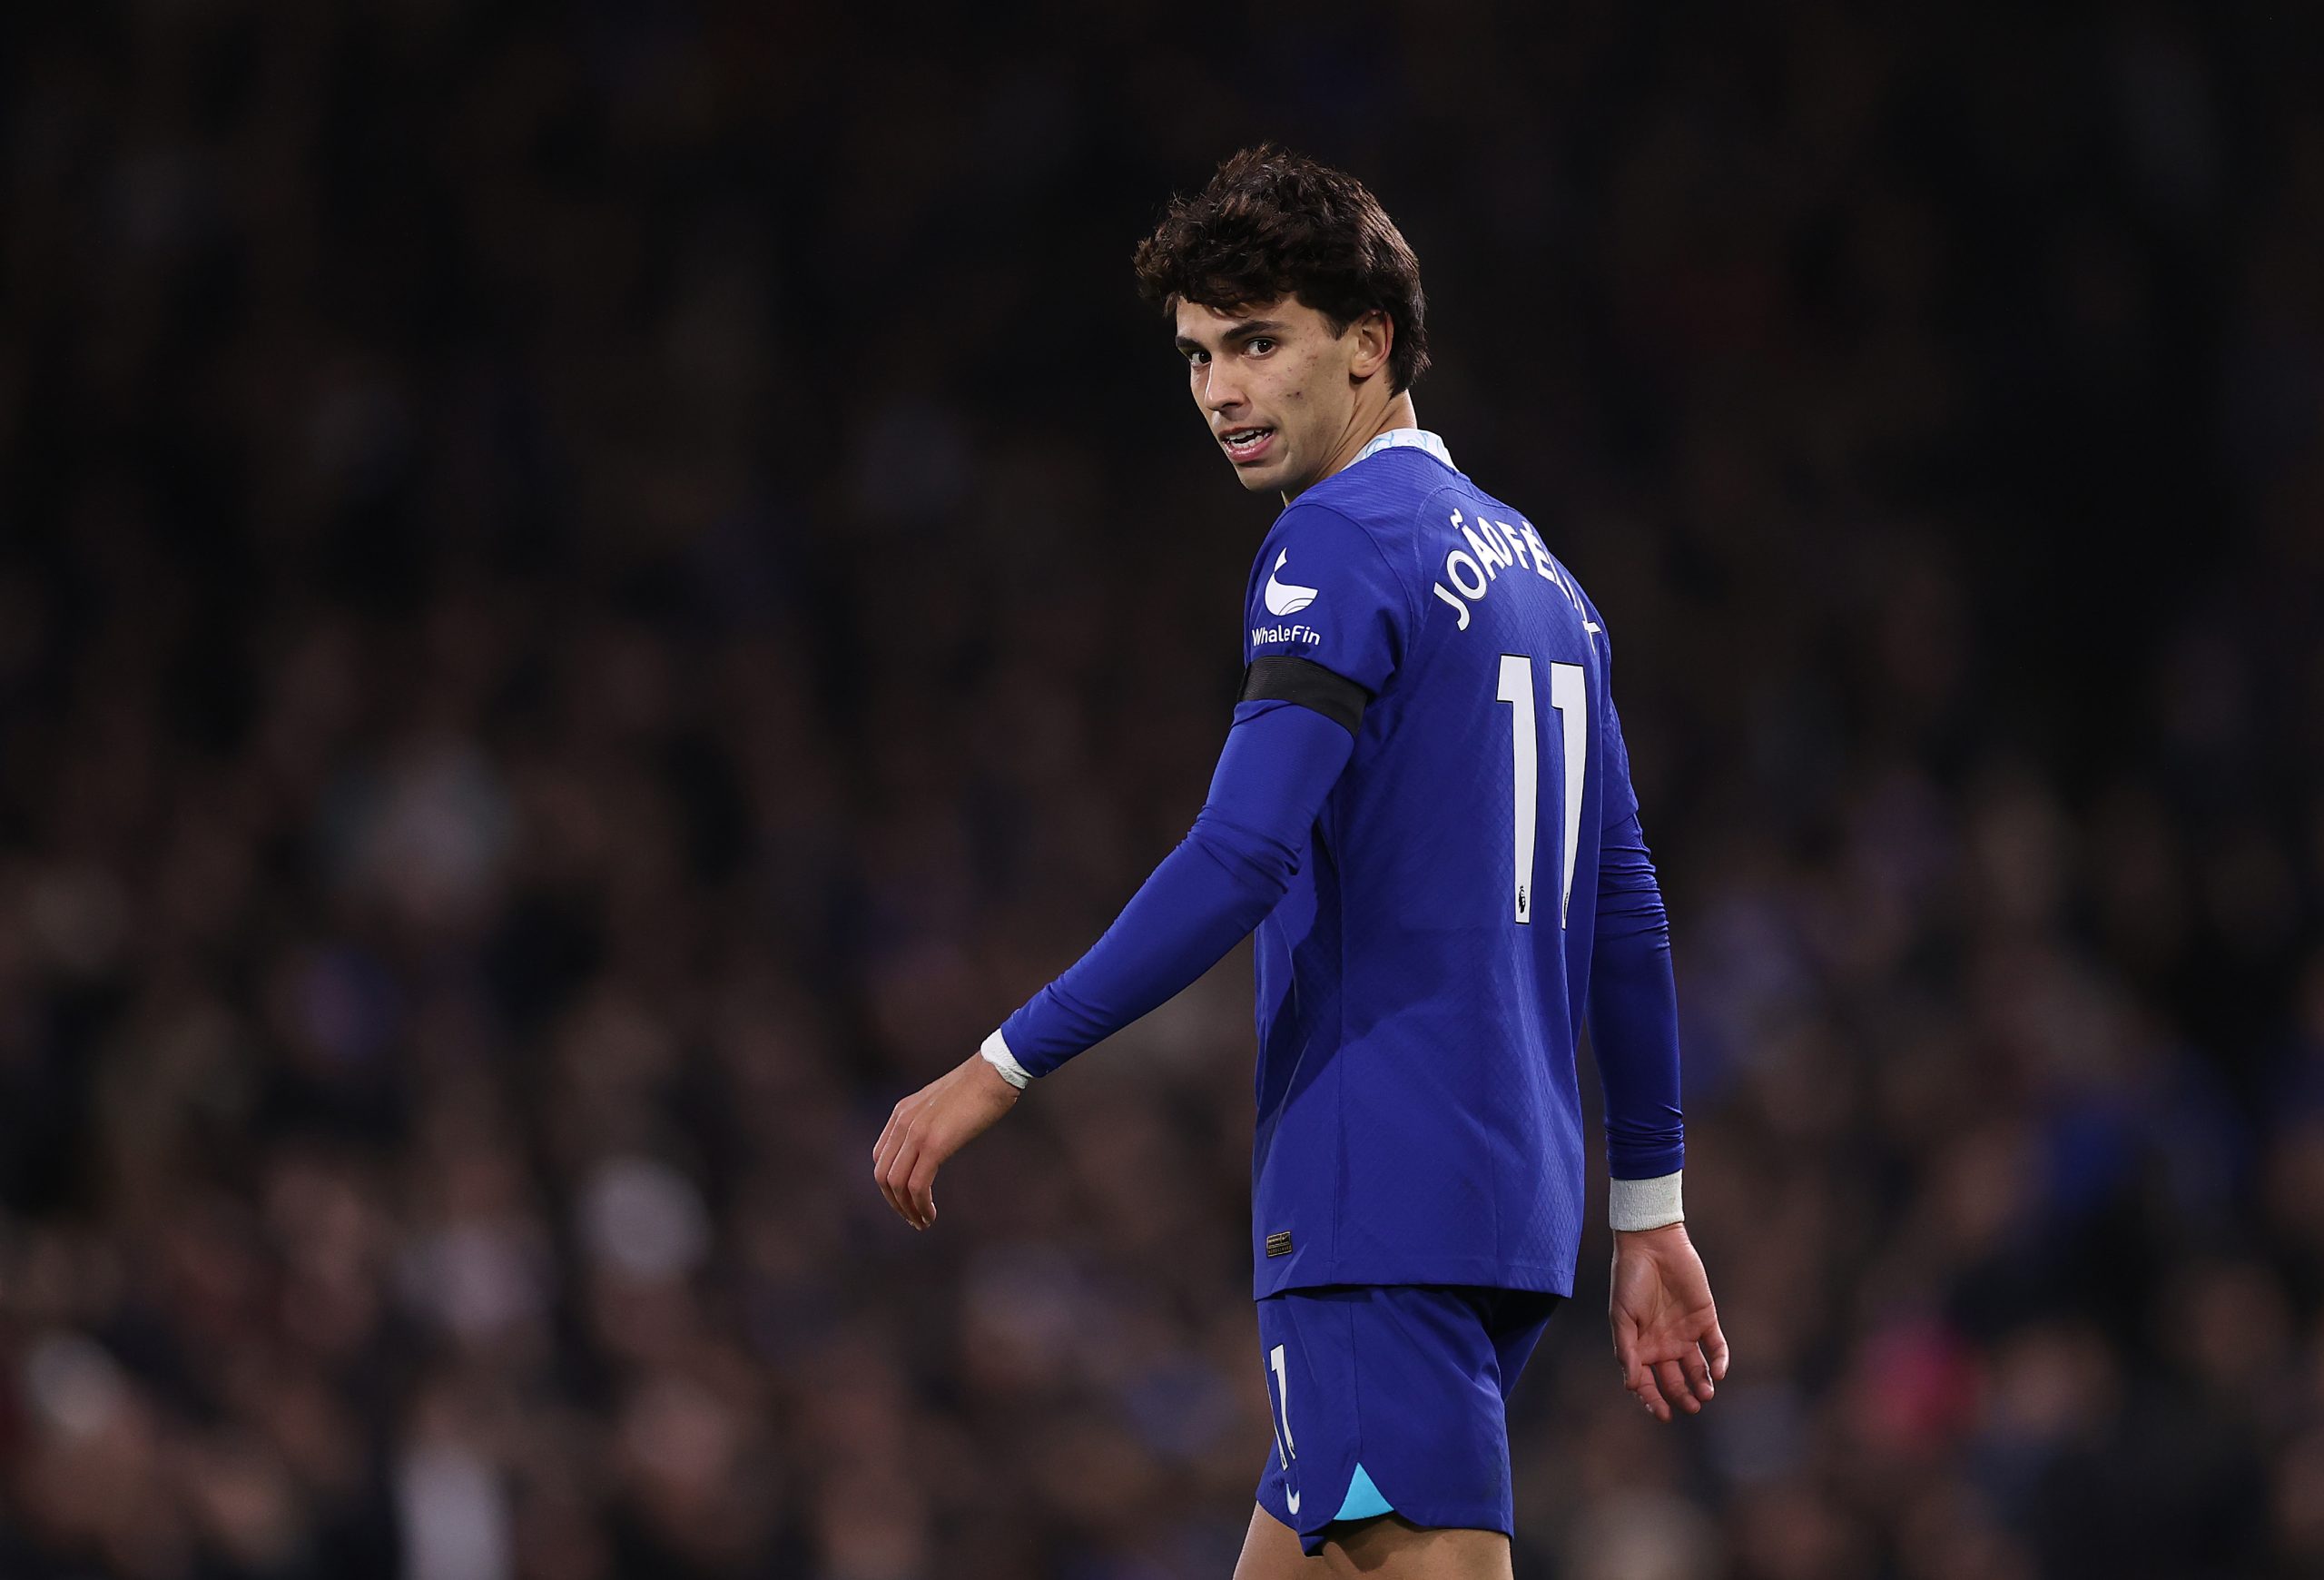 Joao Felix praises new Chelsea signing Enzo Fernandez and defends his price tag.